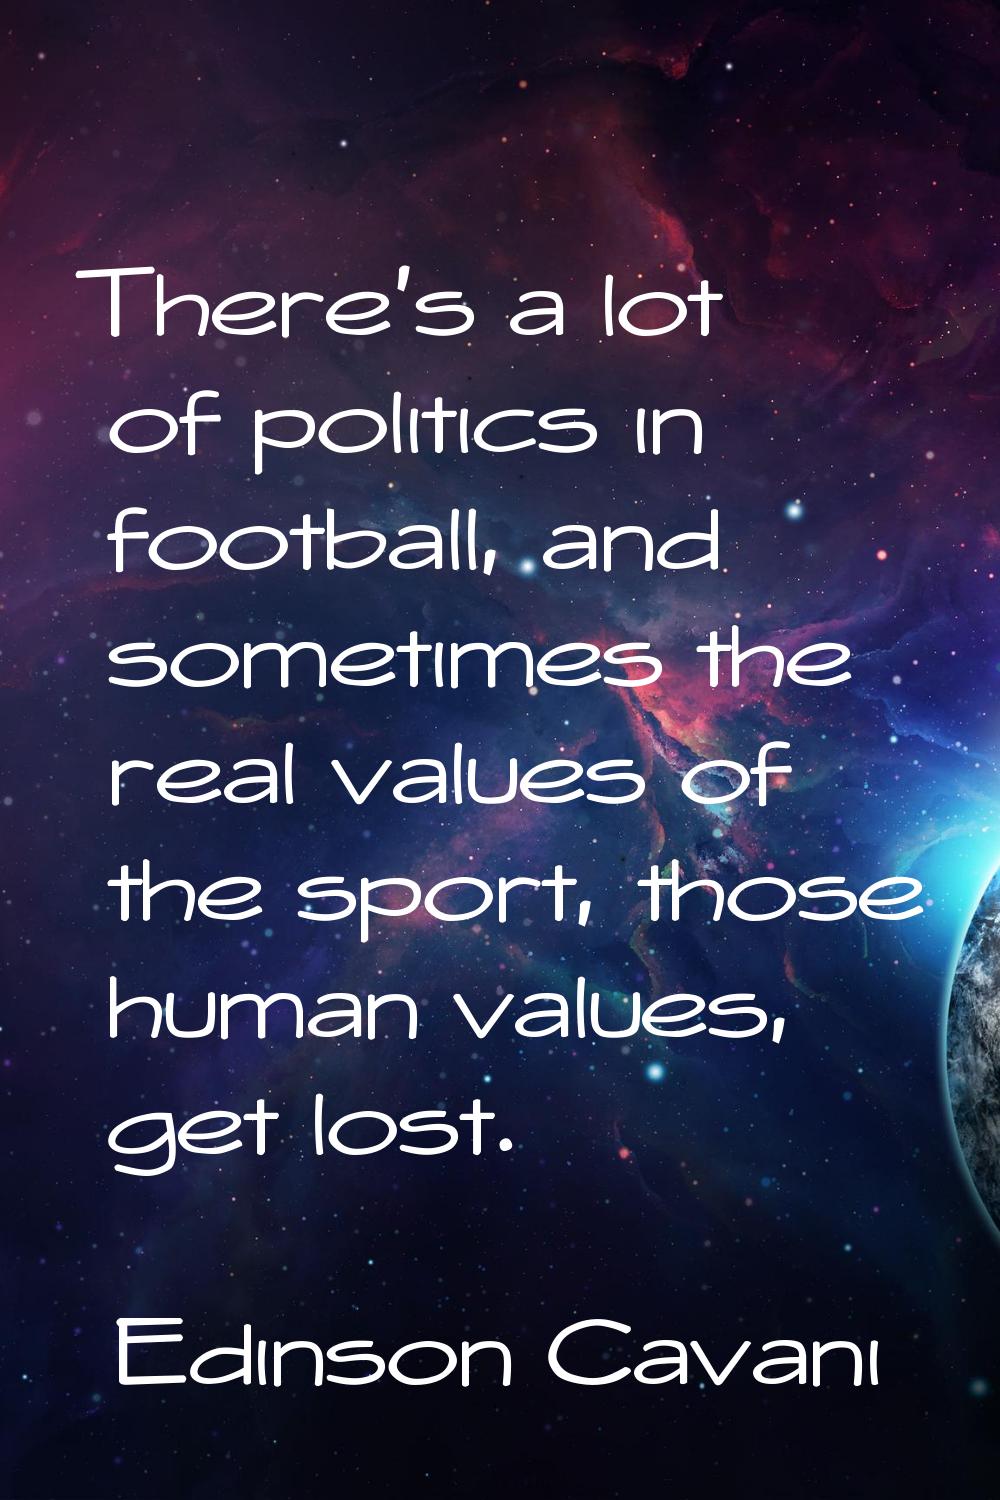 There's a lot of politics in football, and sometimes the real values of the sport, those human valu